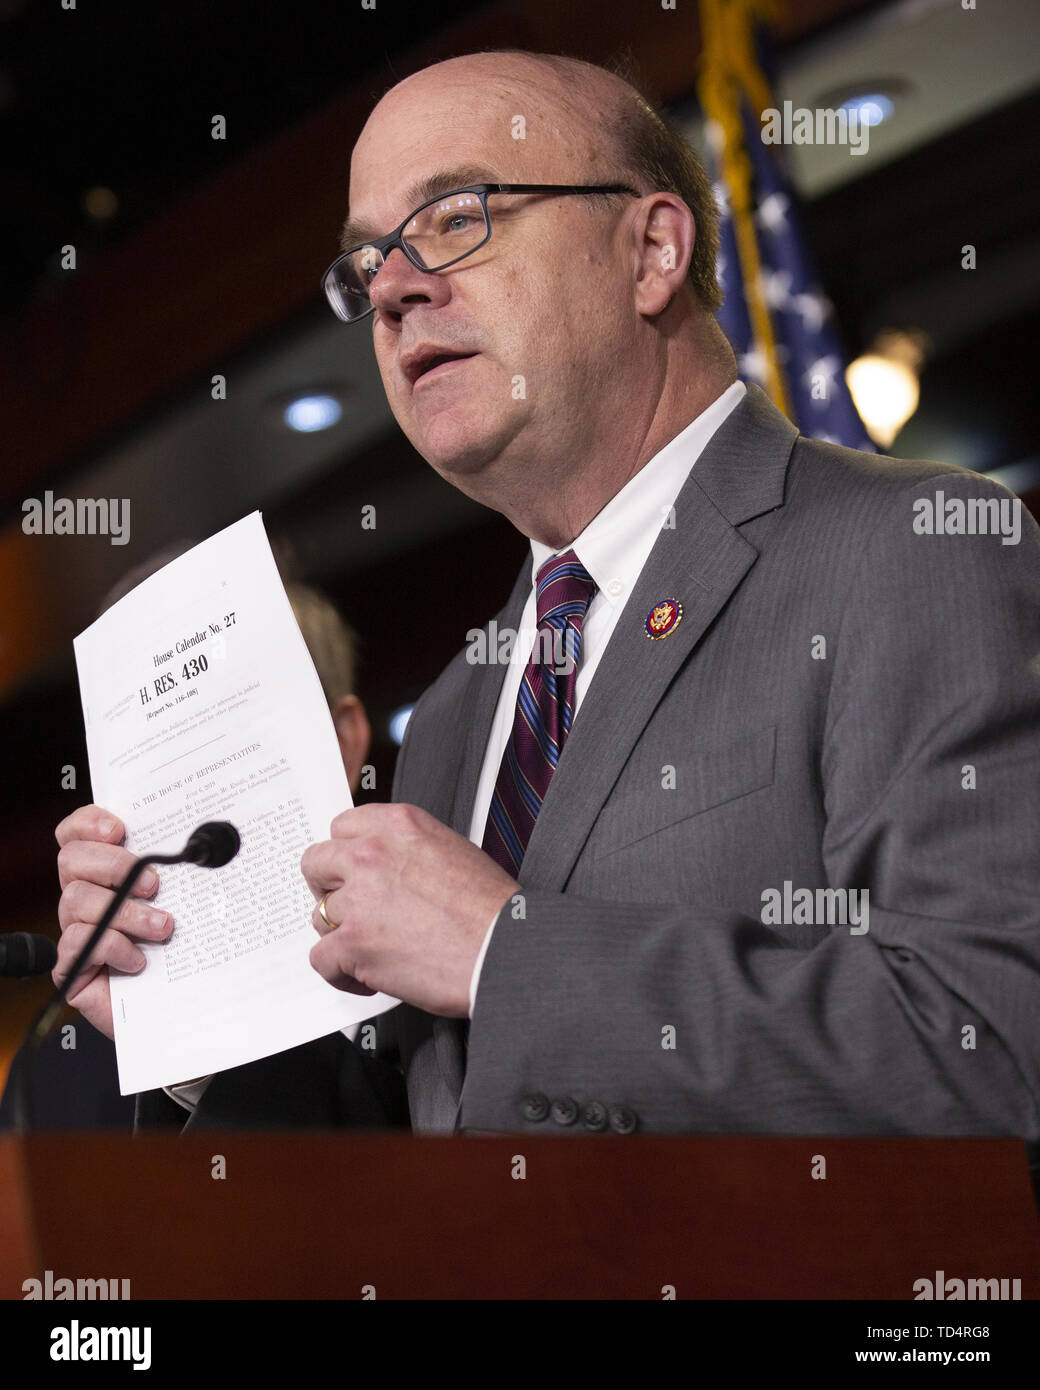 Washington, District of Columbia, USA. 11th June, 2019. Rules Committee Chairman Jim McGovern (Democrat of Massachussetts) attends a press conference on Capitol Hill in Washington, DC, U.S. on June 11, 2019. The press conference followed a House vote, where lawmakers passed a bill which allows the House Judiciary Committee to call on Federal judges to enforce Congressional subpoenas. Credit: Stefani Reynolds/CNP/ZUMA Wire/Alamy Live News Stock Photo